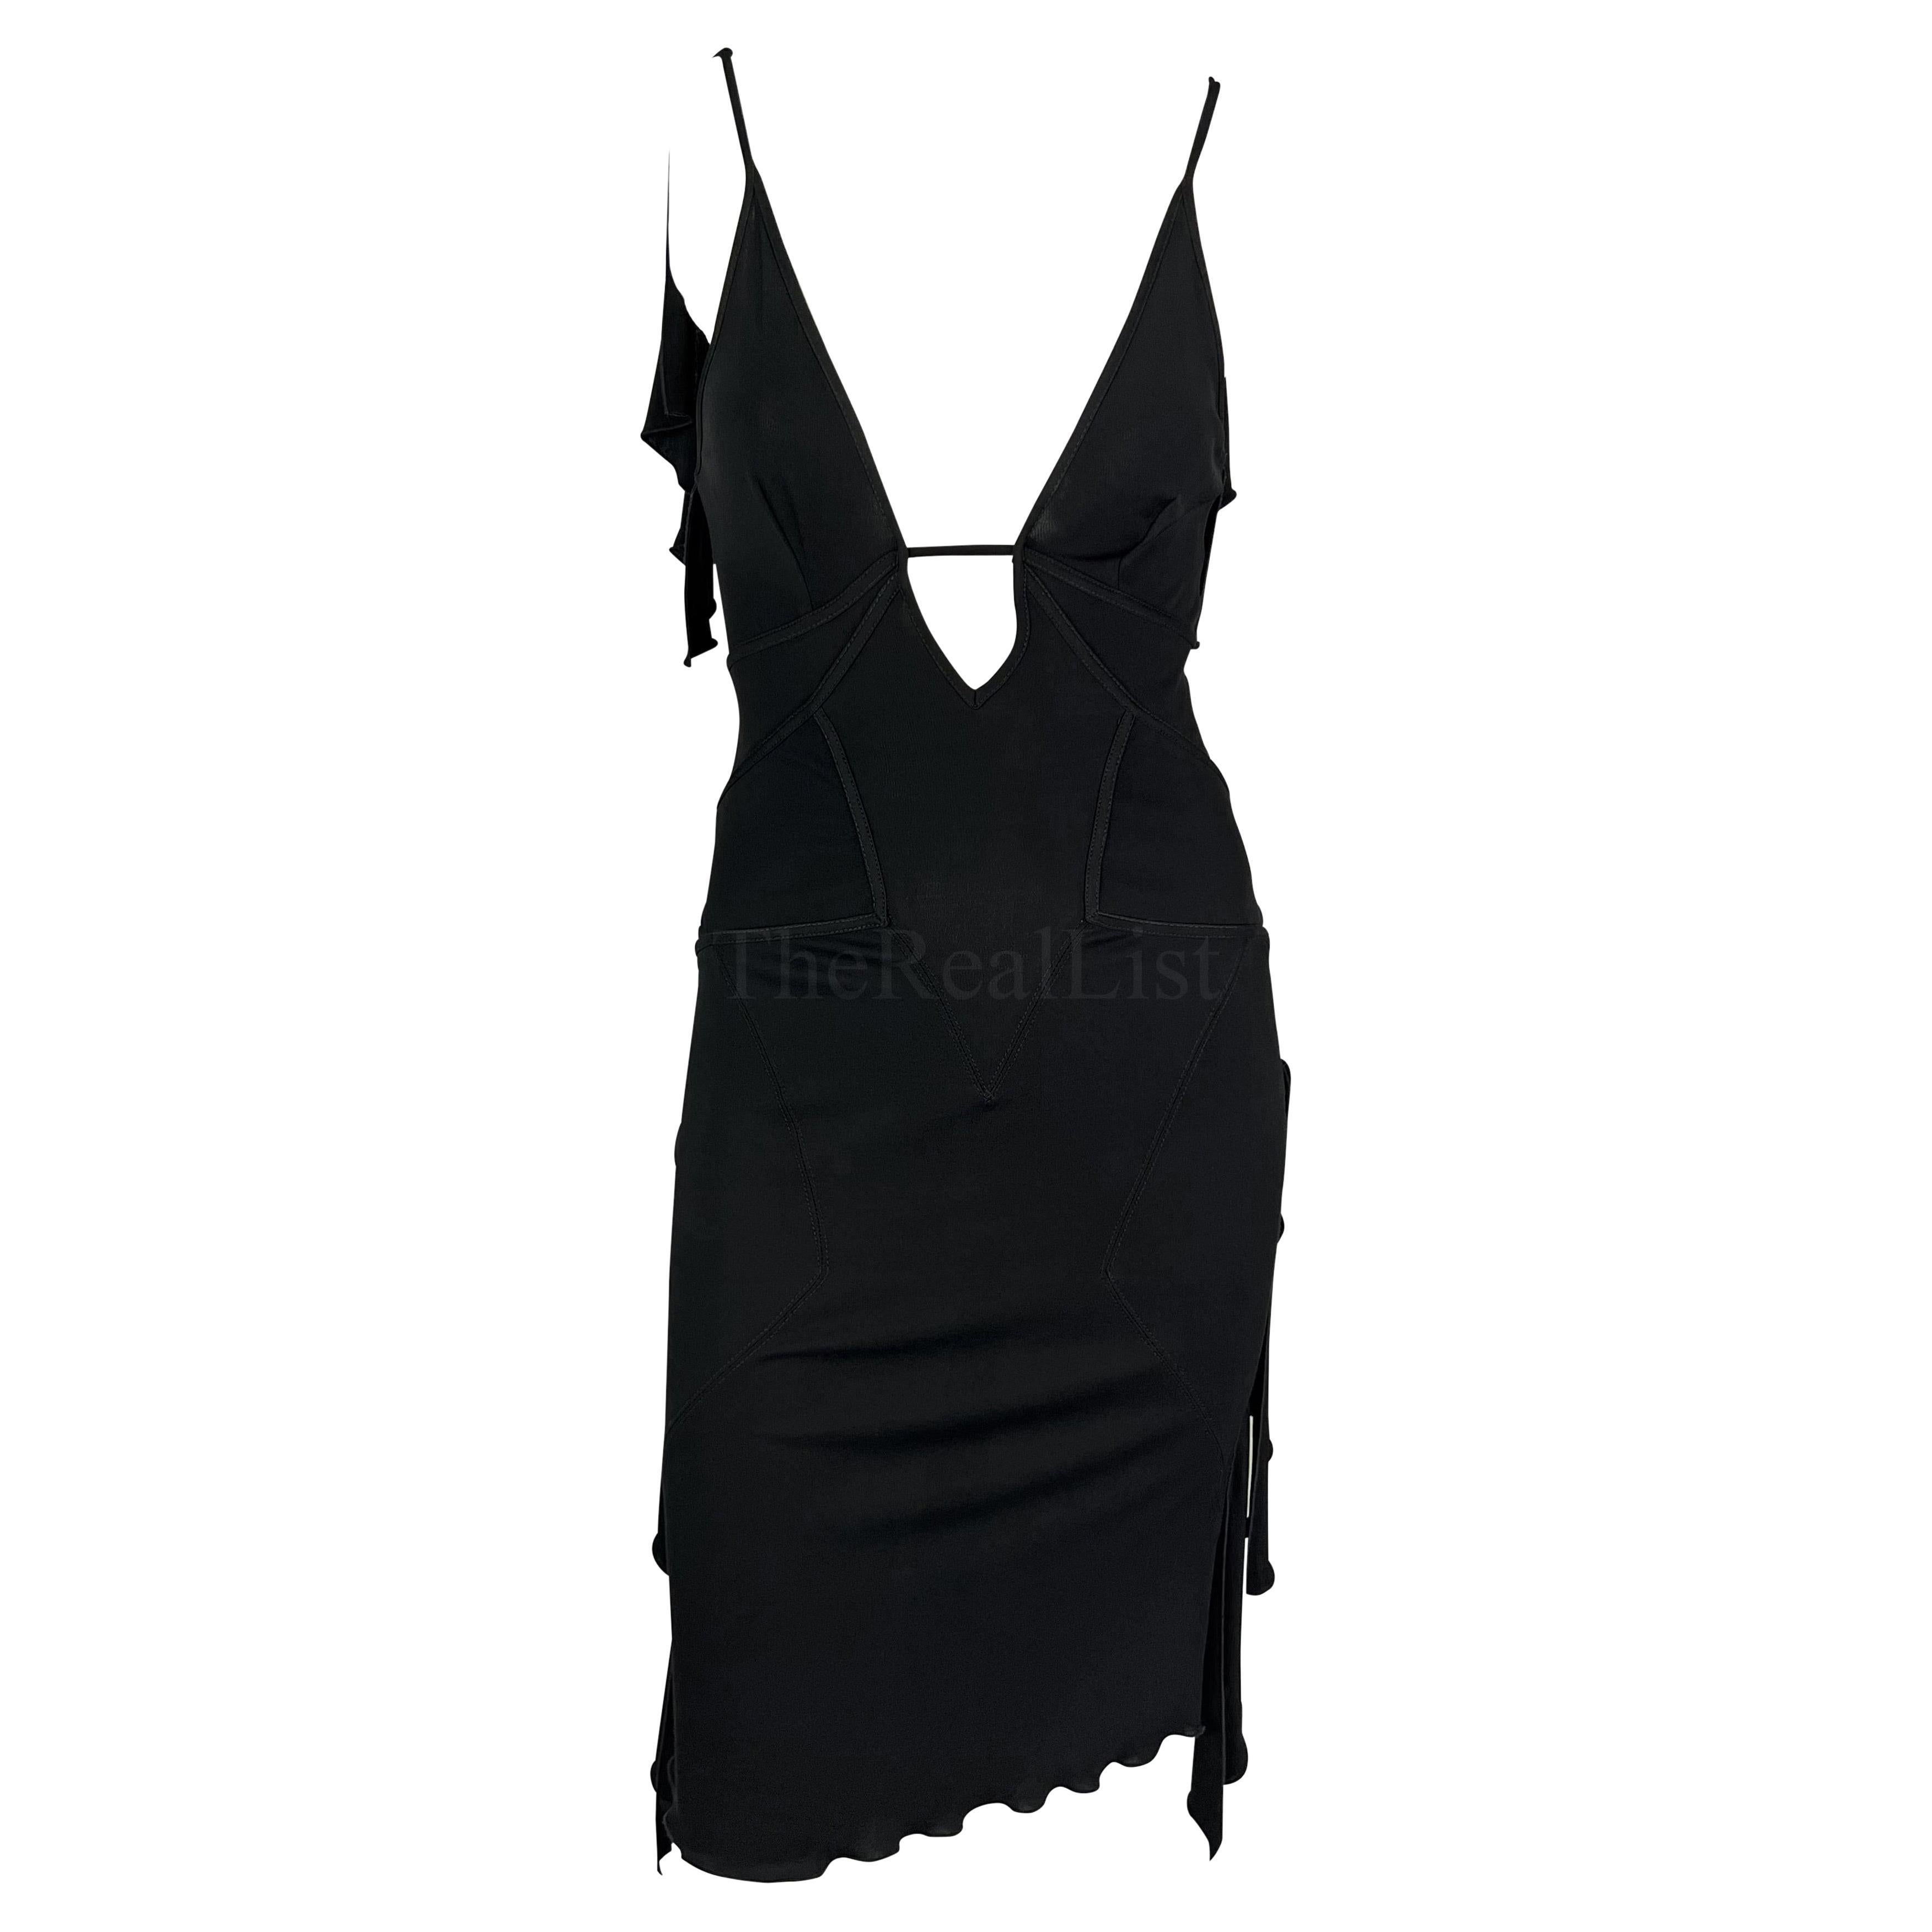 2003 Gucci by Tom Ford Black Plunge Ruffle Dress Sleeveless For Sale